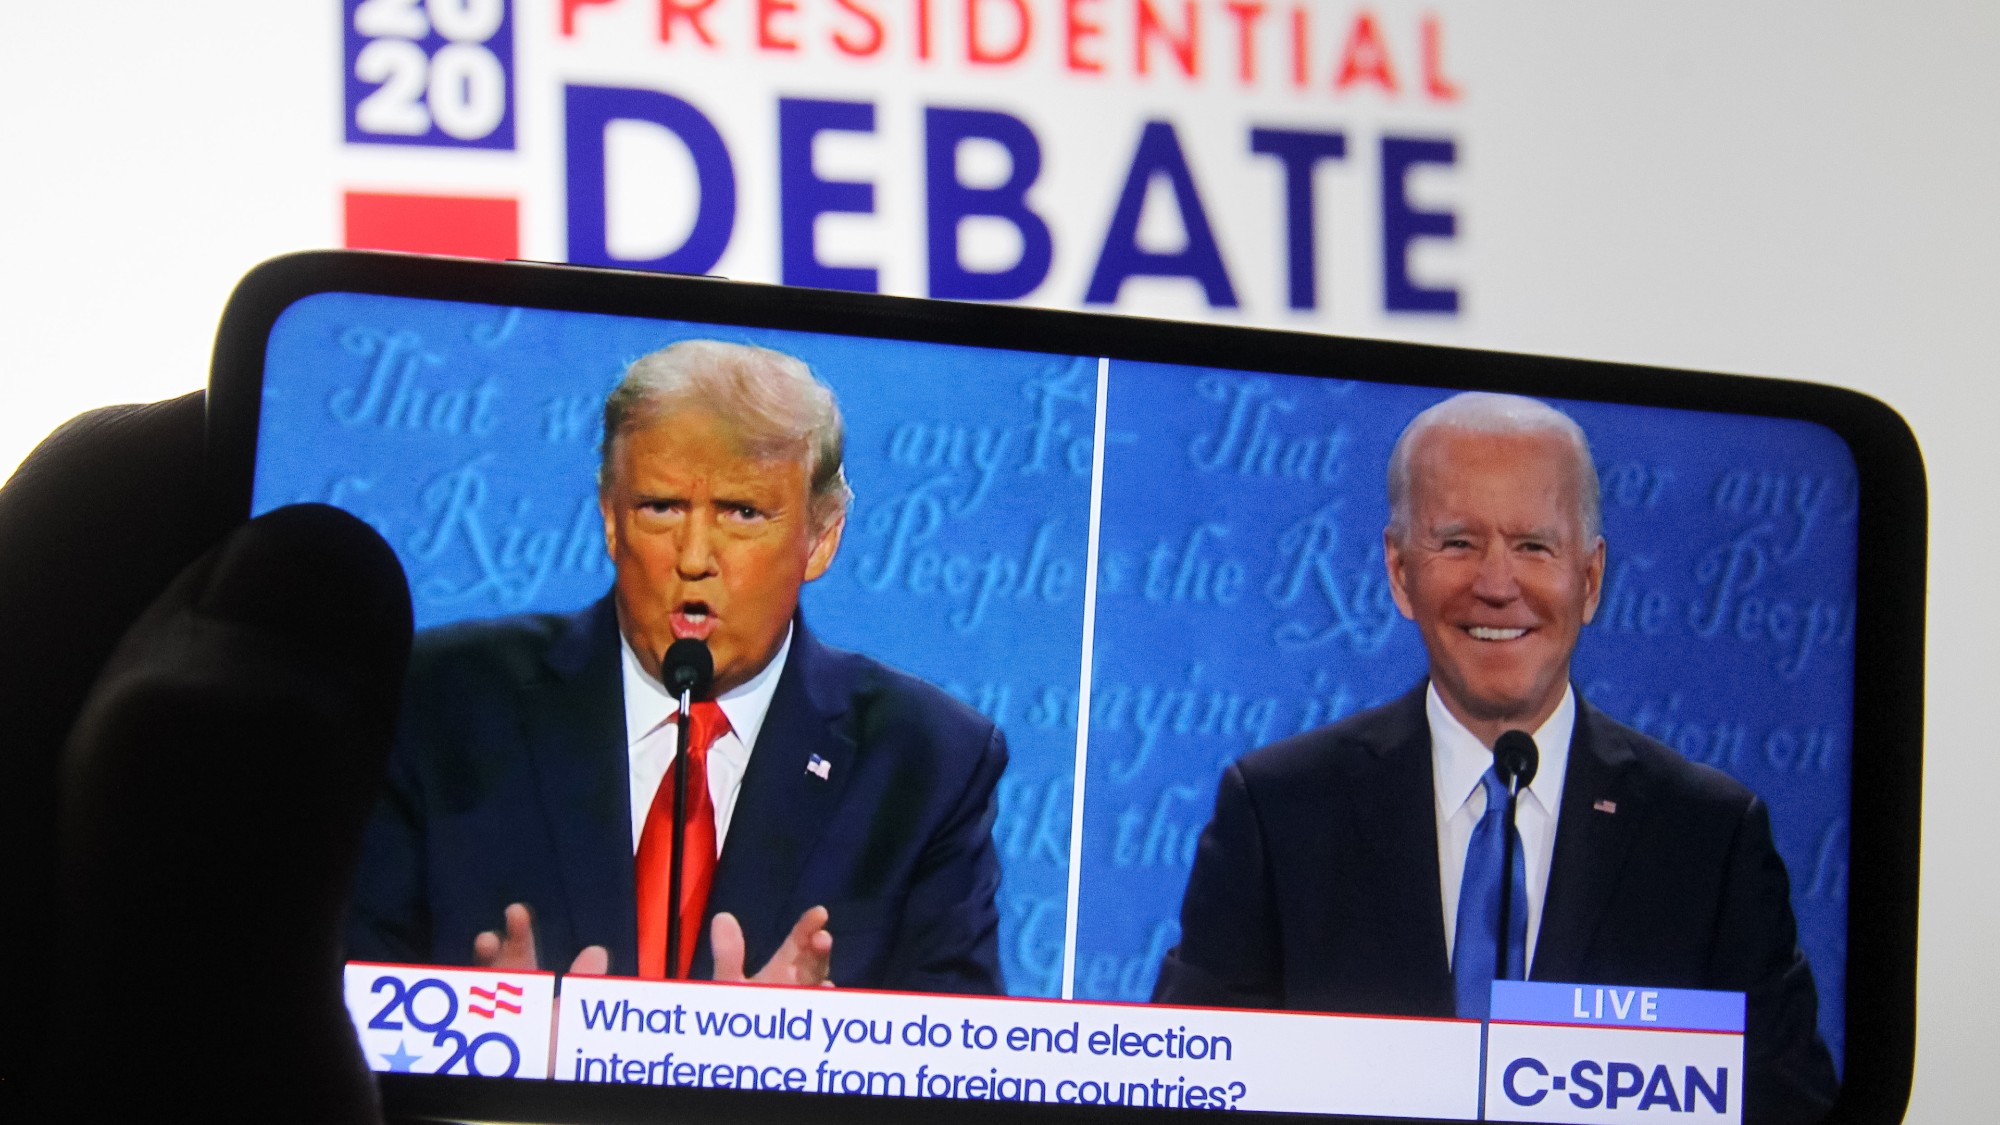 “Presidential debates are more of a performance art than a real means of informing”